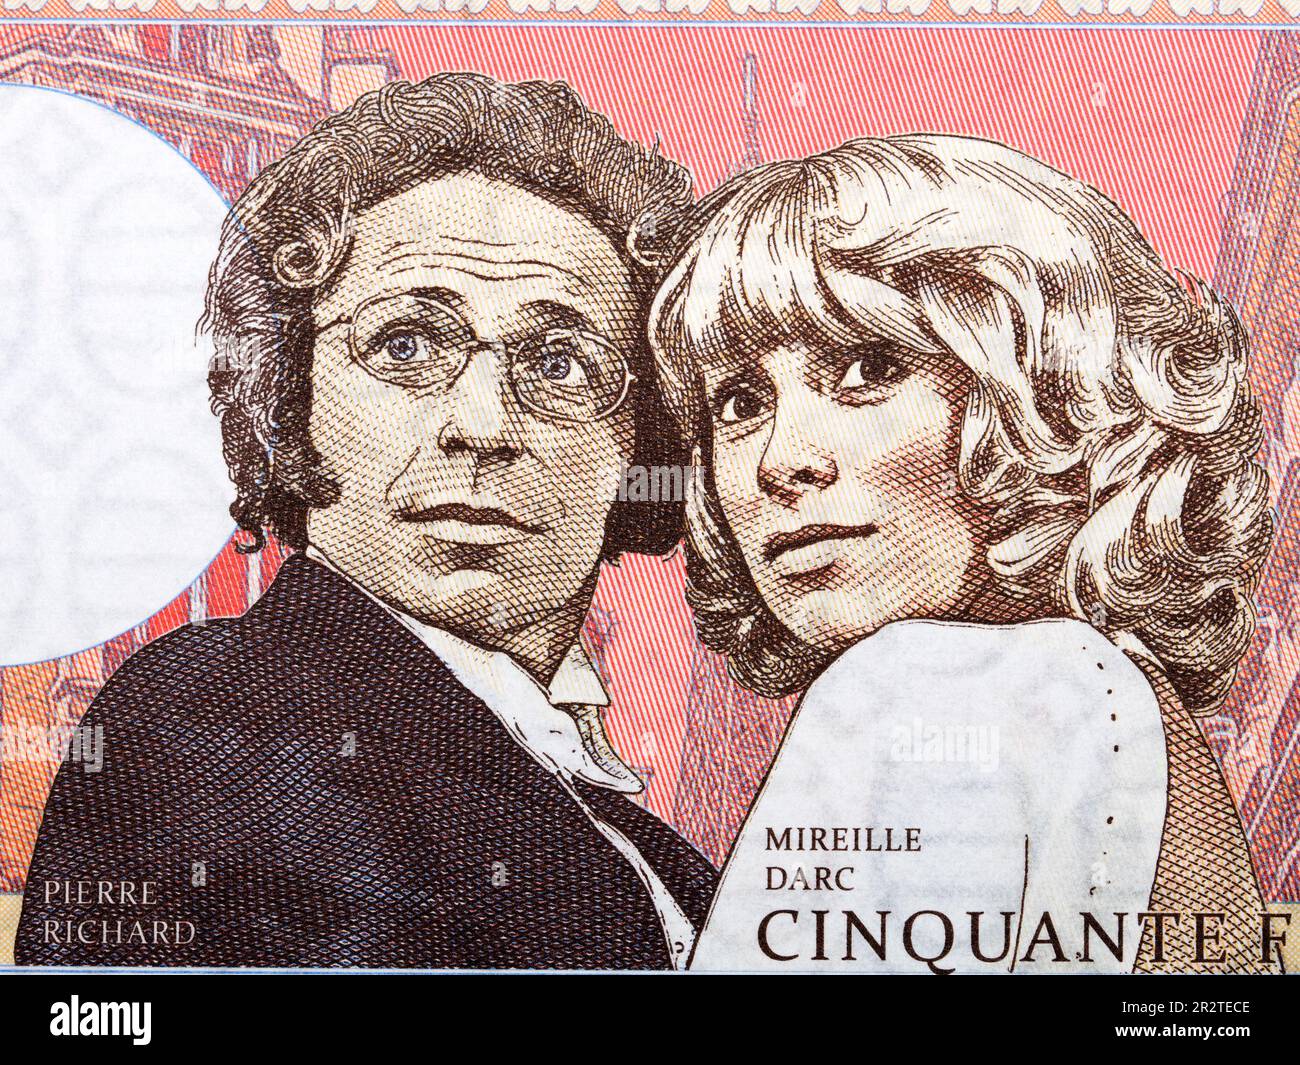 Mireille Darc and Pierre Richard from French money - Francs Stock Photo